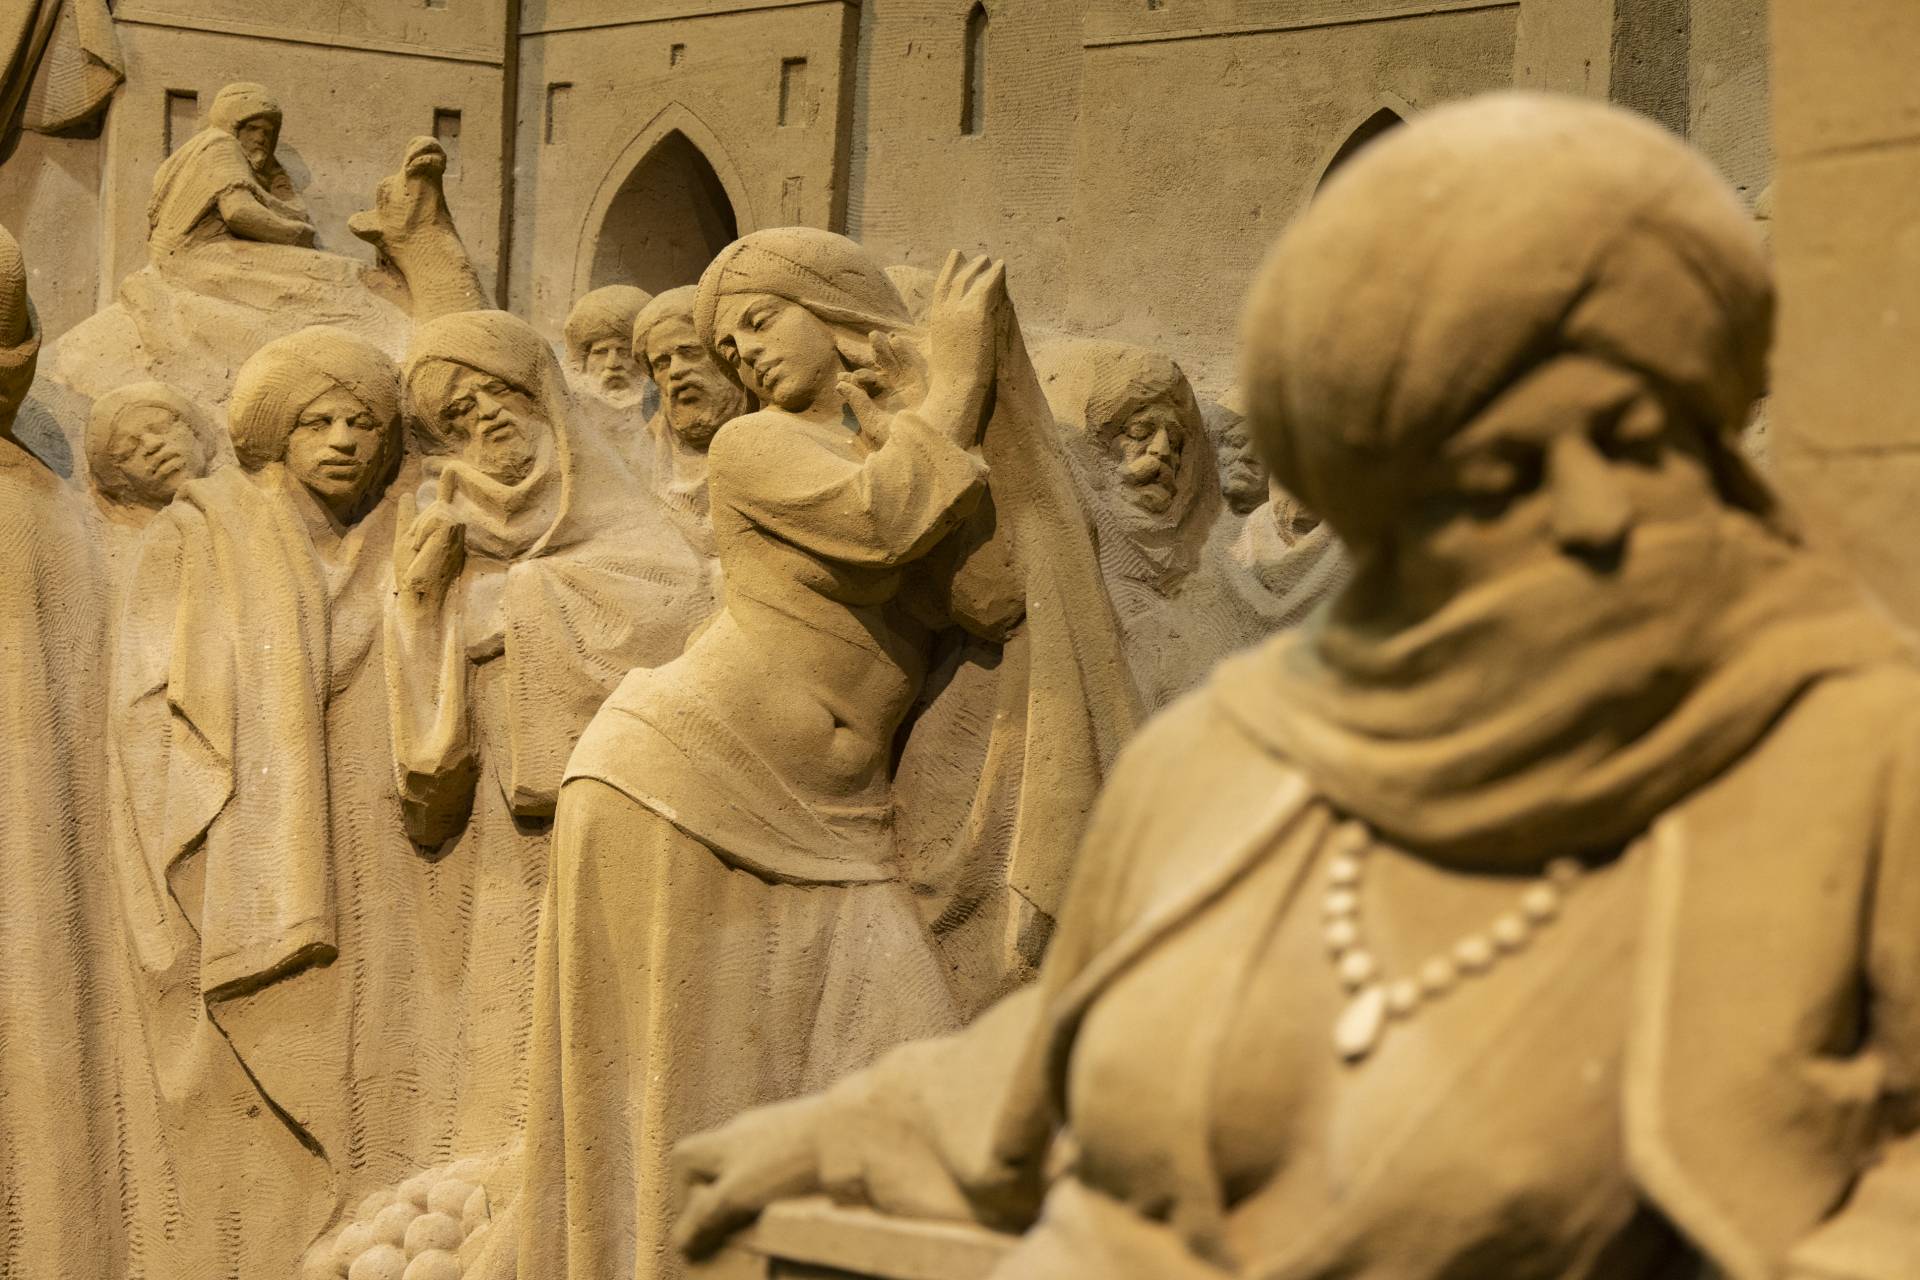 A statue with remarkably intricate expressions, almost unbelievable that its made of sand.